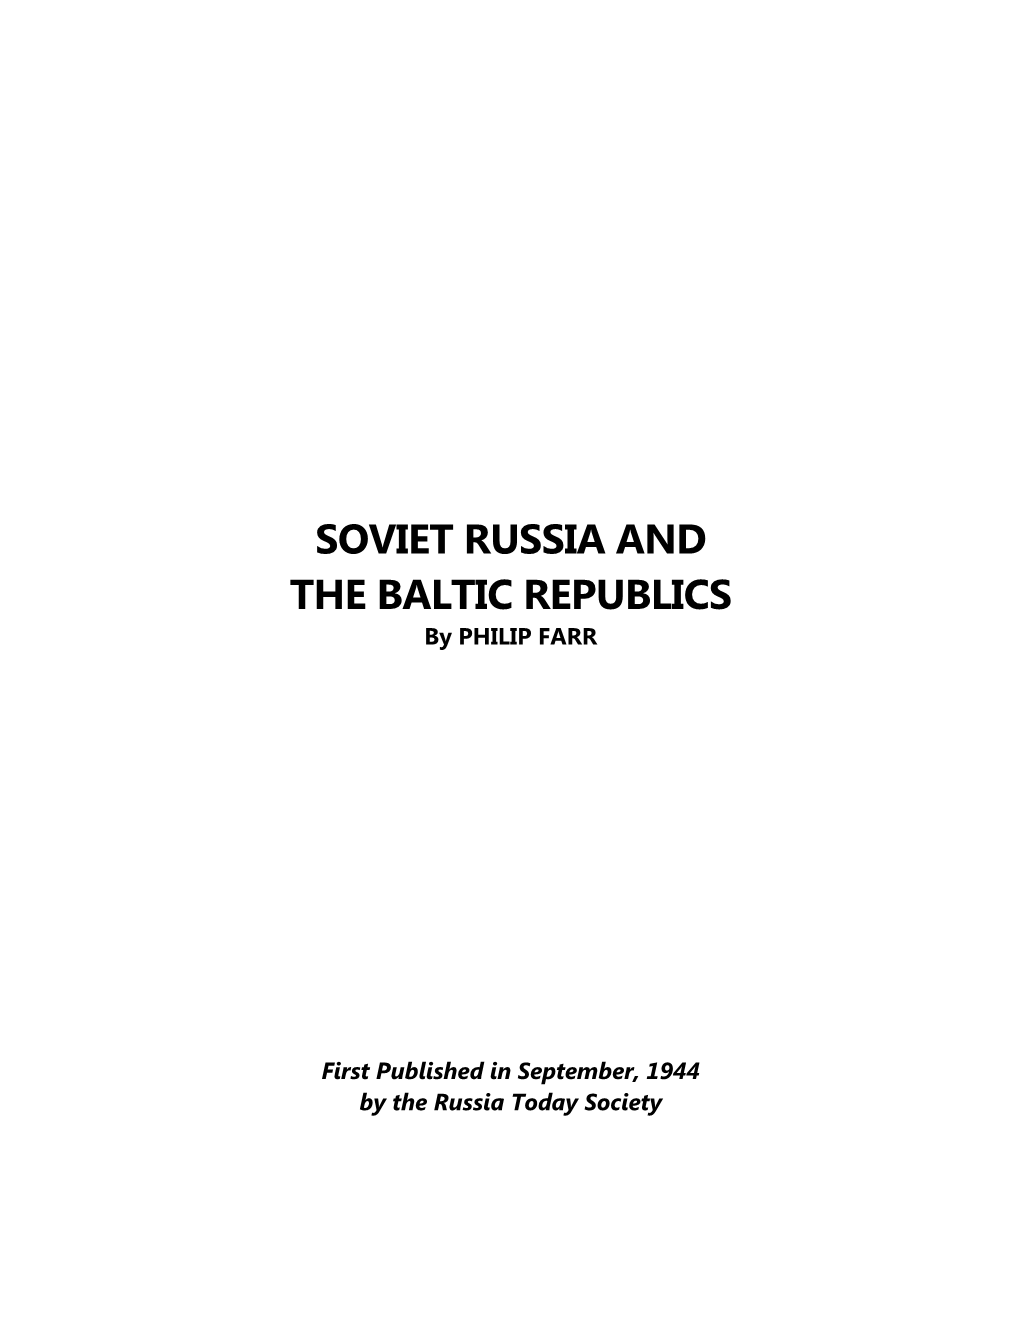 SOVIET RUSSIA and the BALTIC REPUBLICS by PHILIP FARR